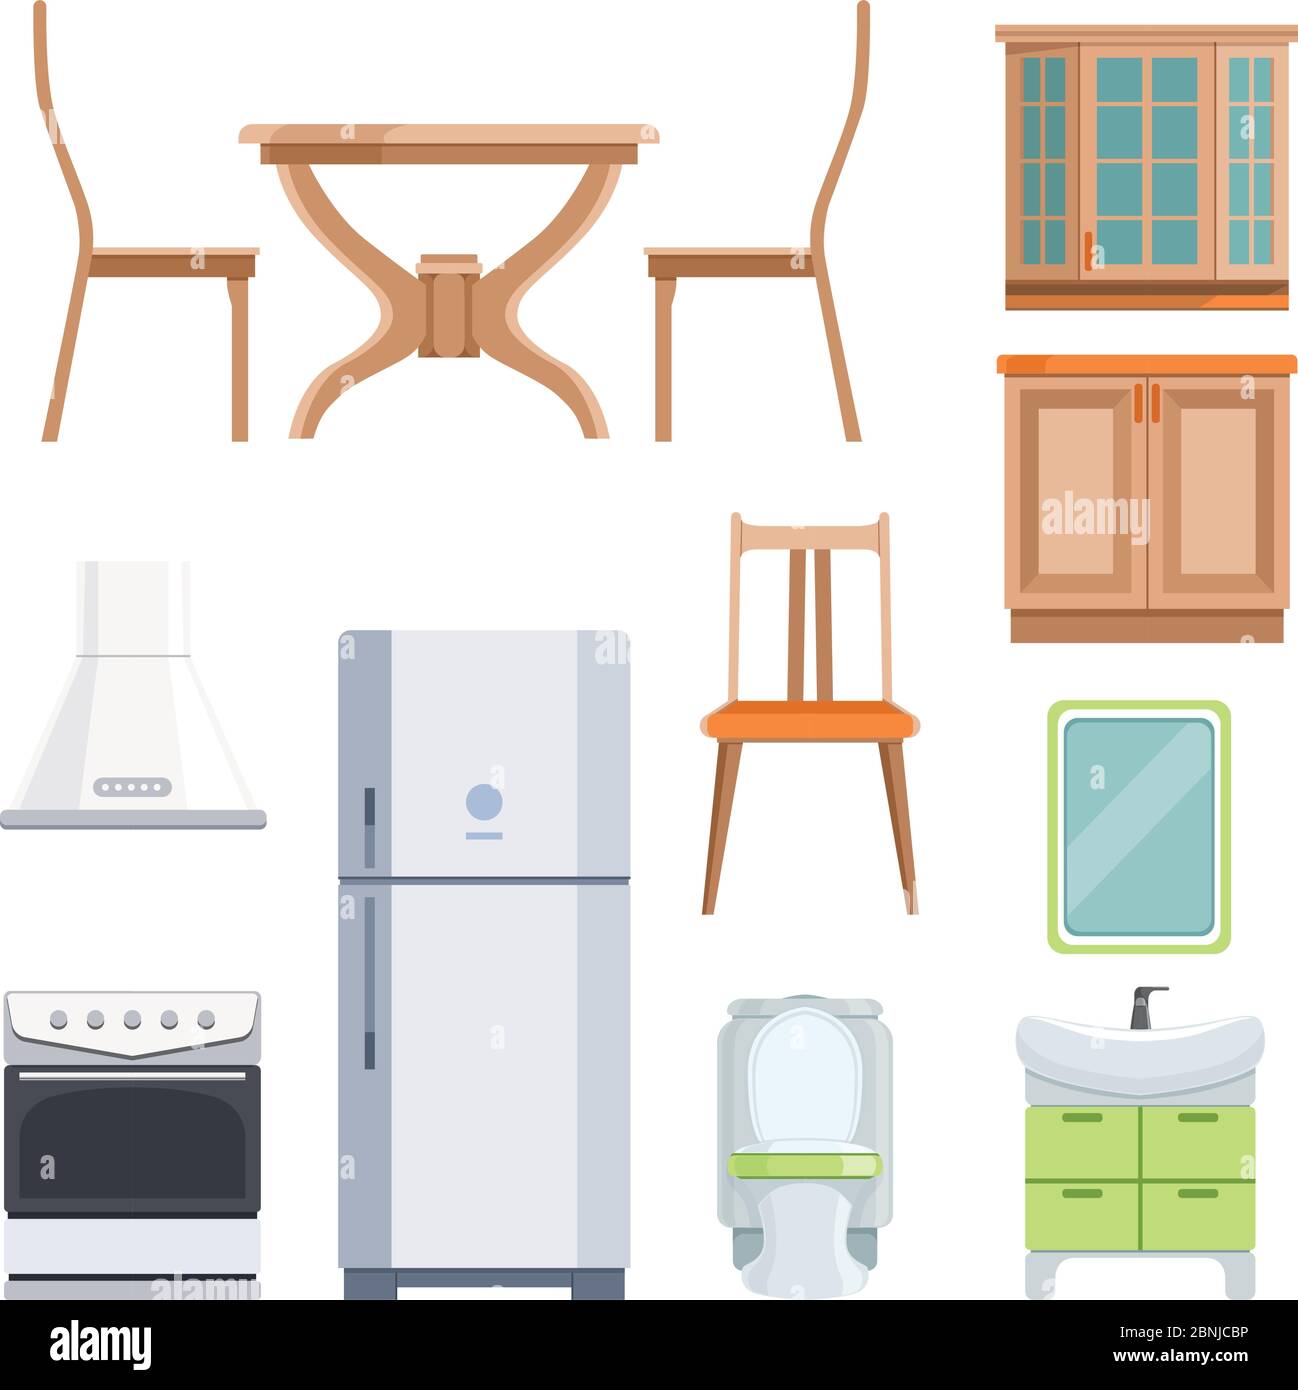 Different furniture for living room and kitchen Stock Vector